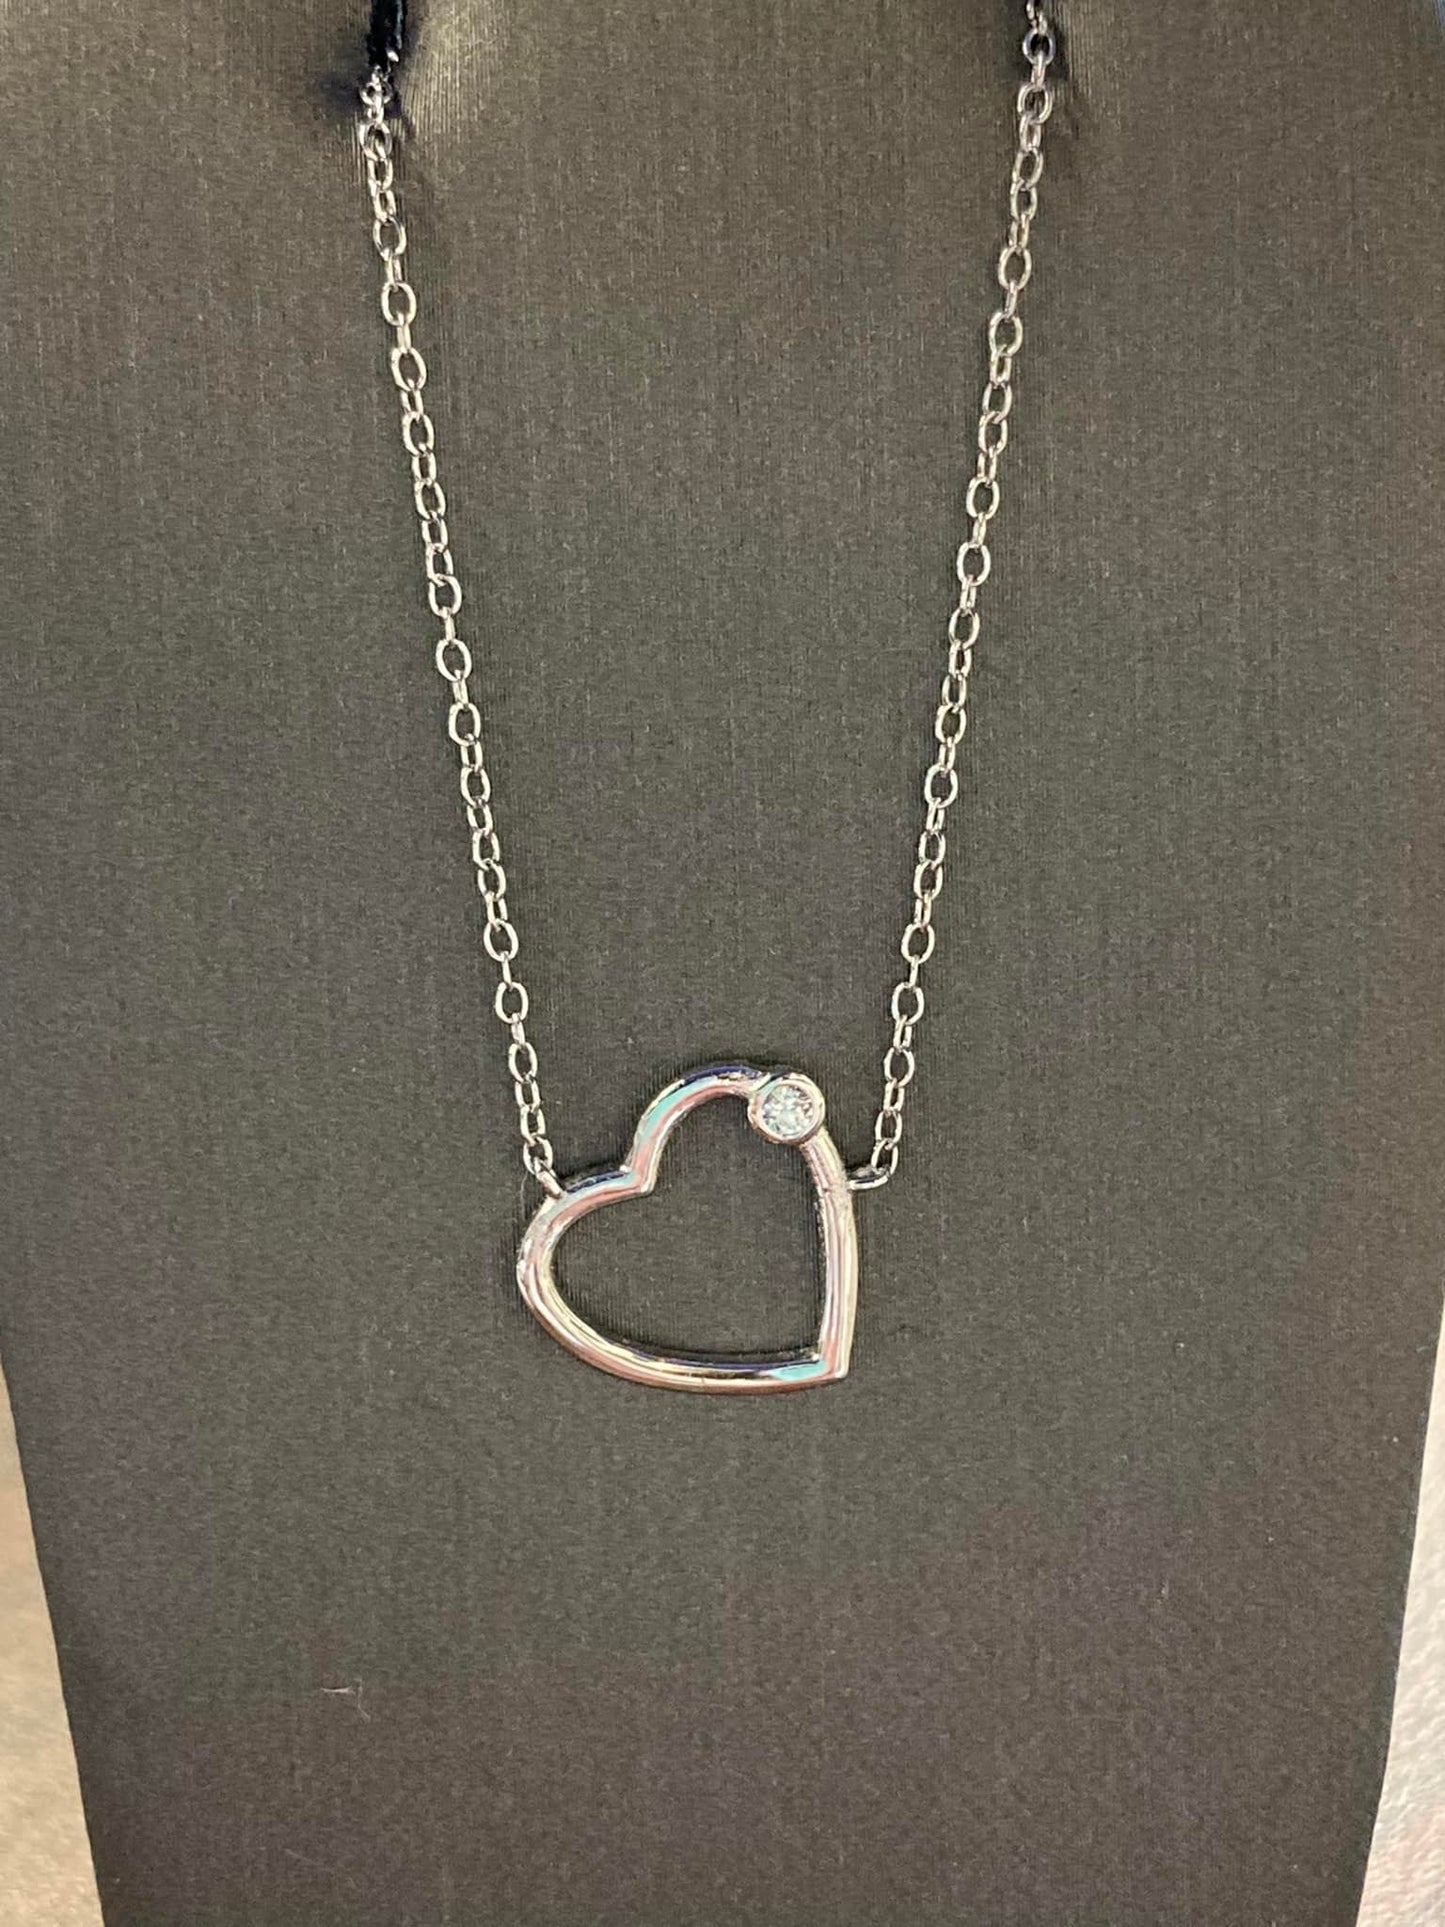 Sterling Silver Heart Necklace 16” + 2 $33